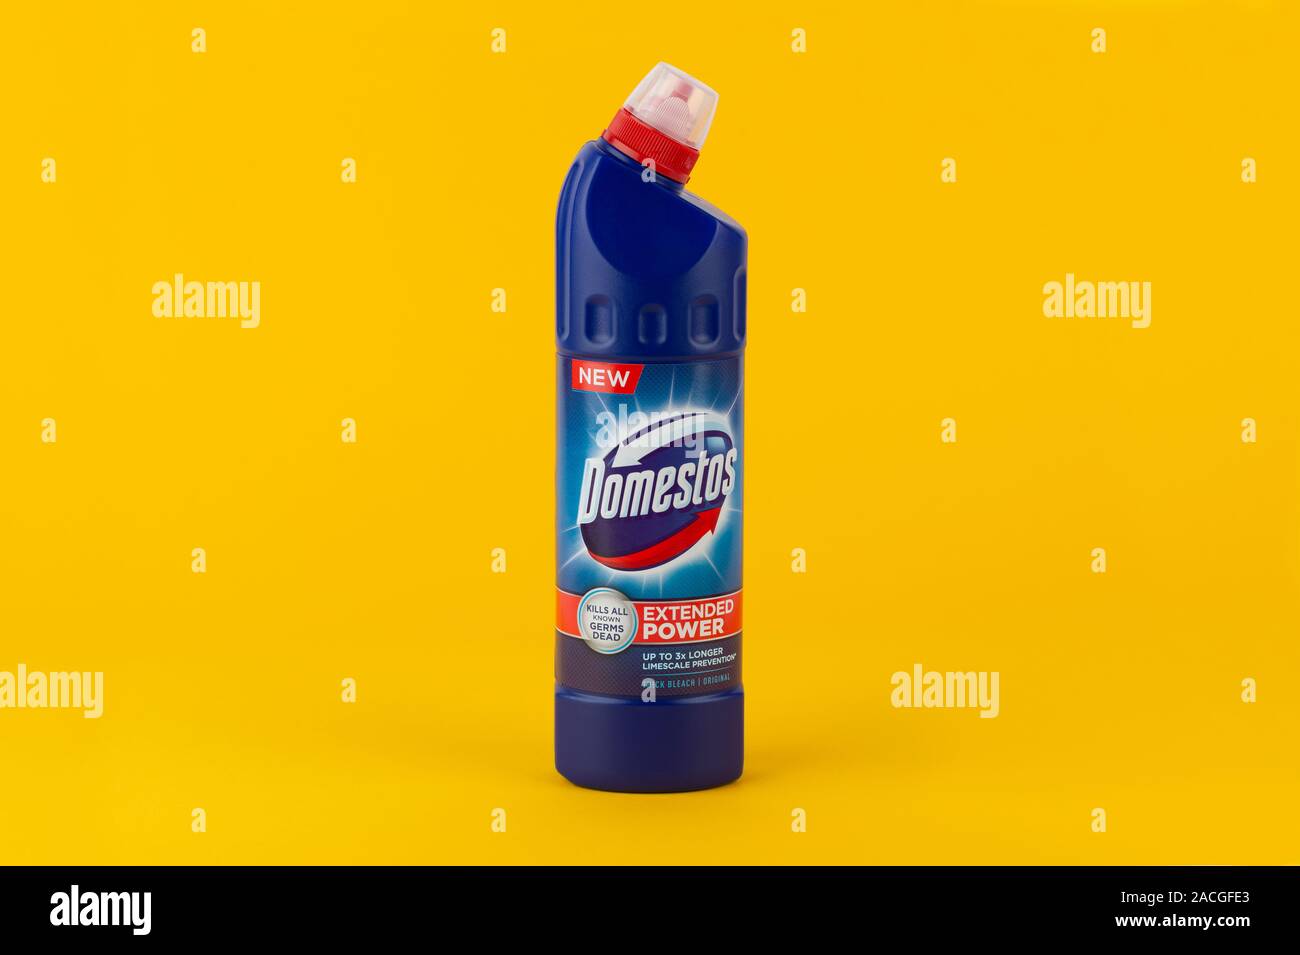 A Domestos bleach bottle shot on a yellow background. Stock Photo